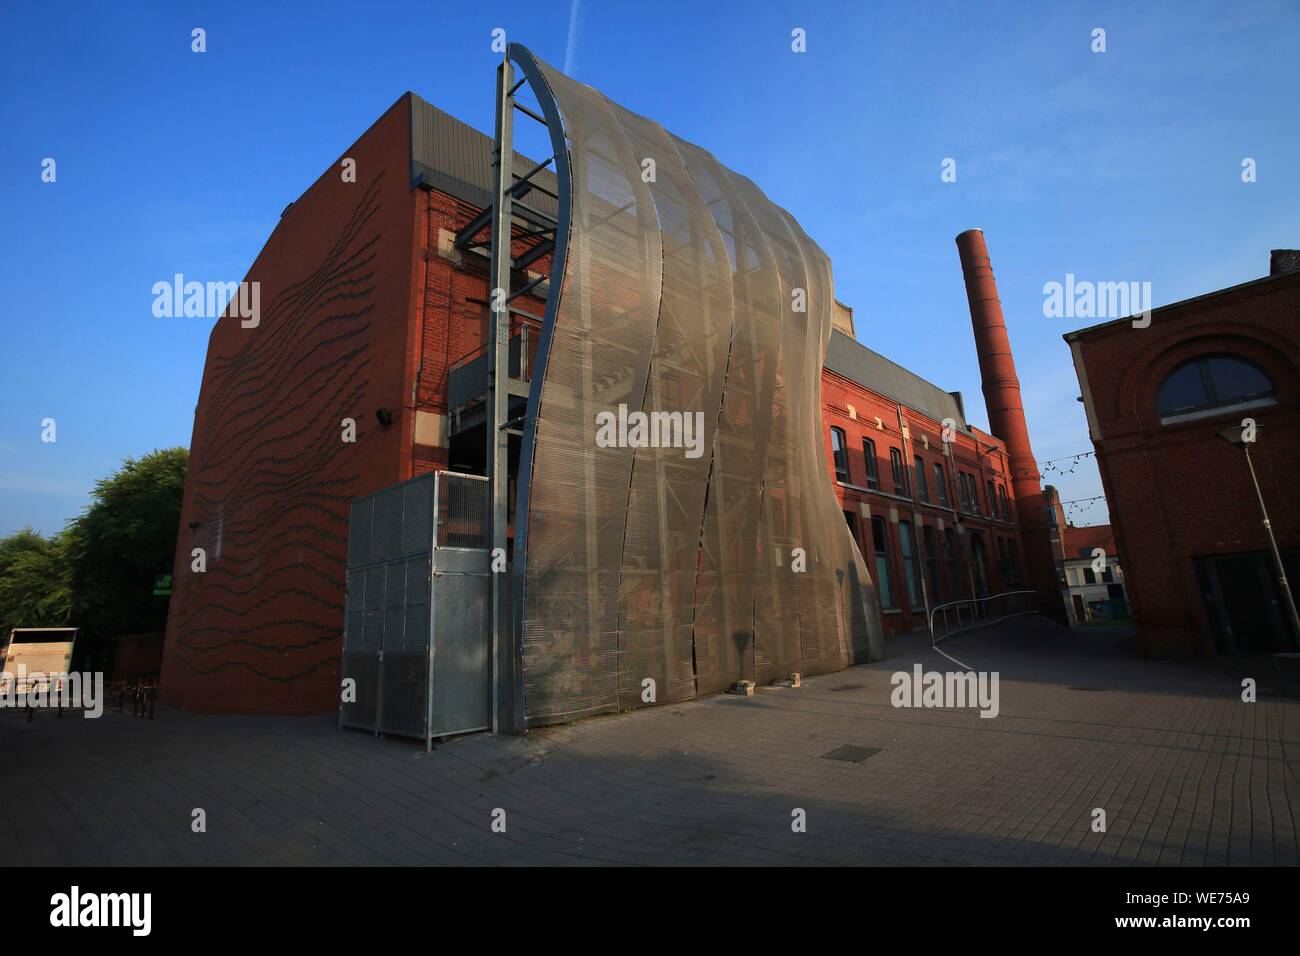 France, Nord, Lille, Wazemmes, Brick and steel facade of Maison Folie Stock Photo